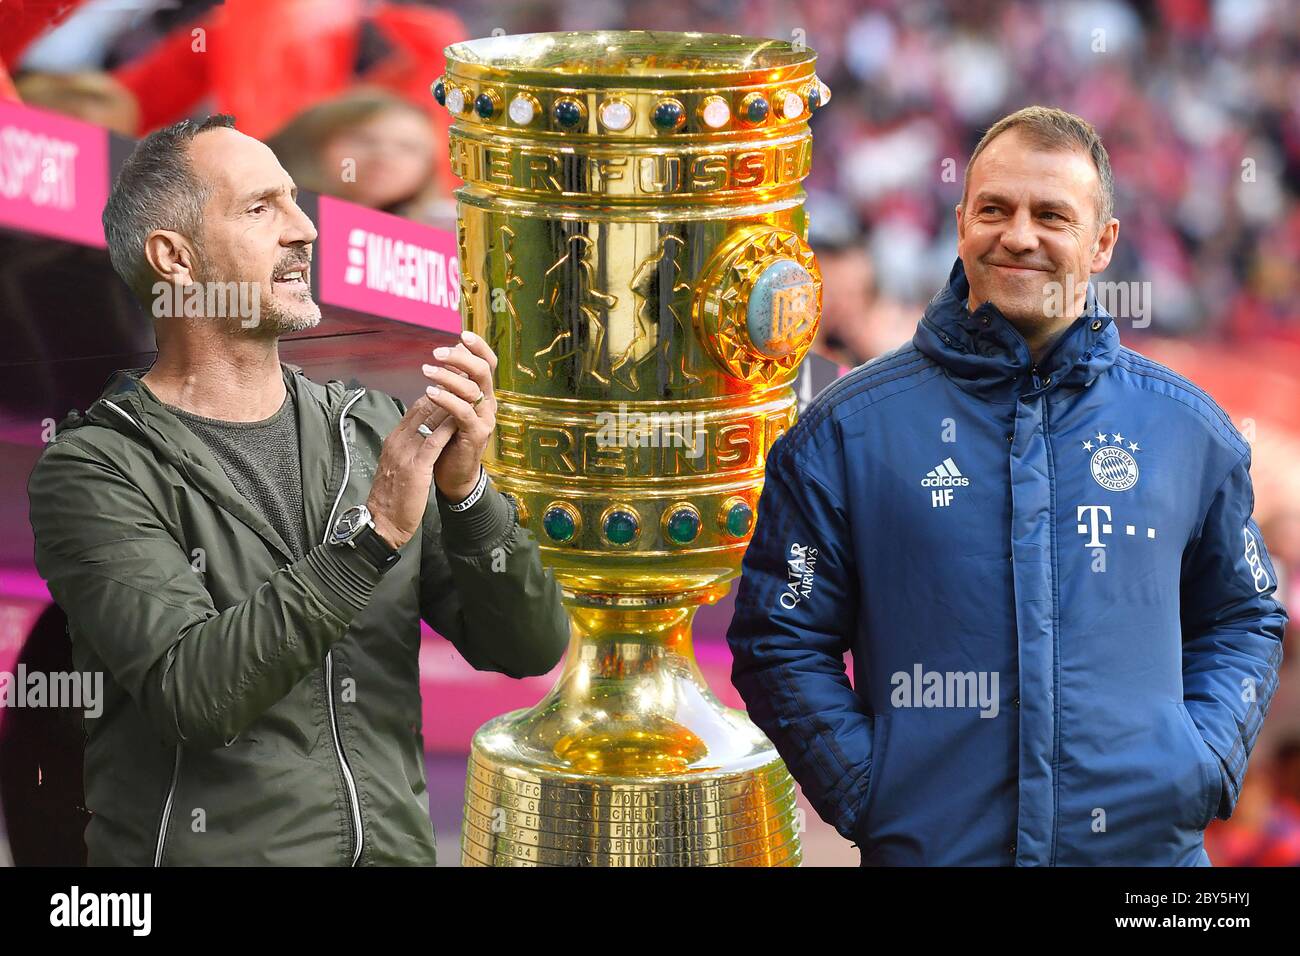 Photo Assembly Preview Of The Dfb Cup Semi Final Fc Bayern Munich Eintracht Frankfurt From Left Adi Huetter Coach Eintracht Frankfurt And Hans Dieter Flick Hansi Coach Fc Bayern Munich With The Dfb Pokal